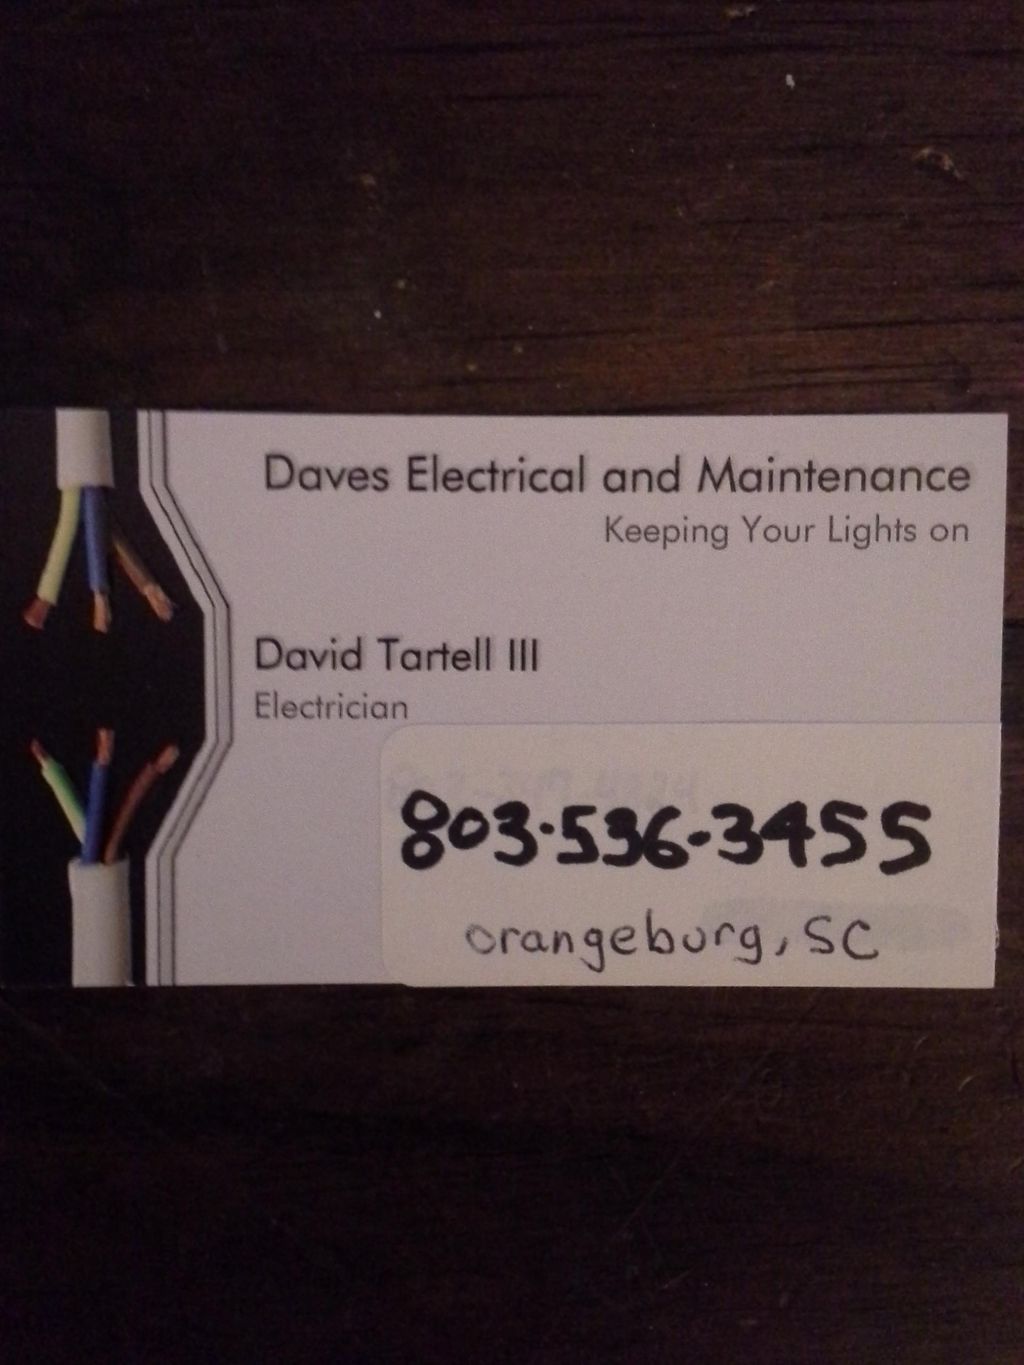 Daves Electrical and Maintenance